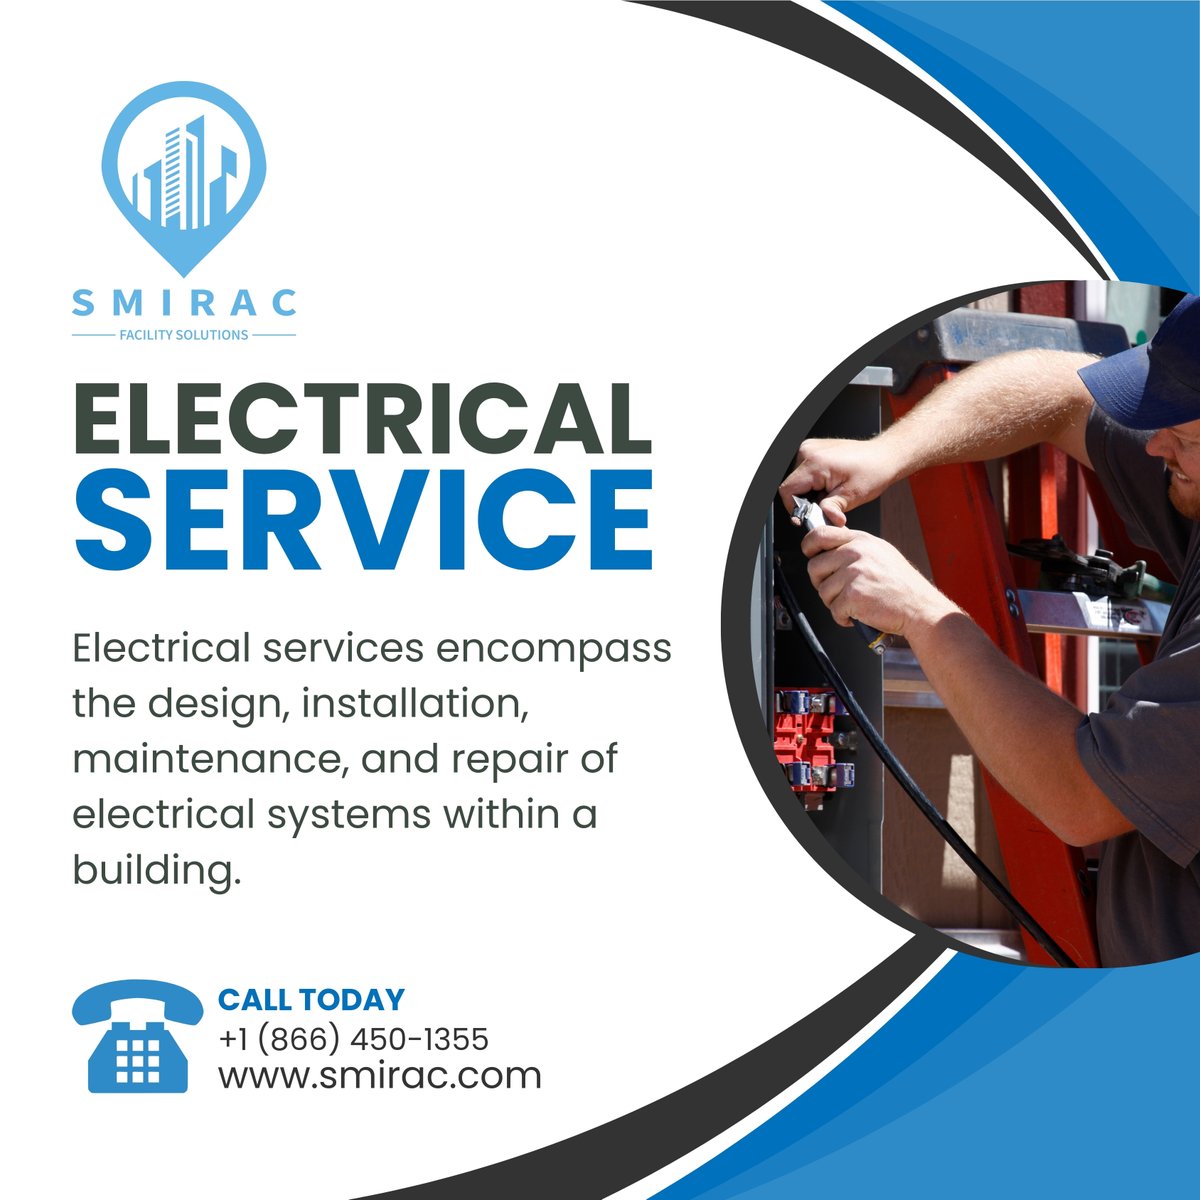 📣 Illuminate Your Space with SmiRac Facility Services 🌟

#SmiRacFacility #ElectricalService #BrightenUp #EcoFriendly #SafetyFirst #24hrService #FacilityManagement #ProfessionalElectricians #cleaning #cleaninghacks #cleaningtips